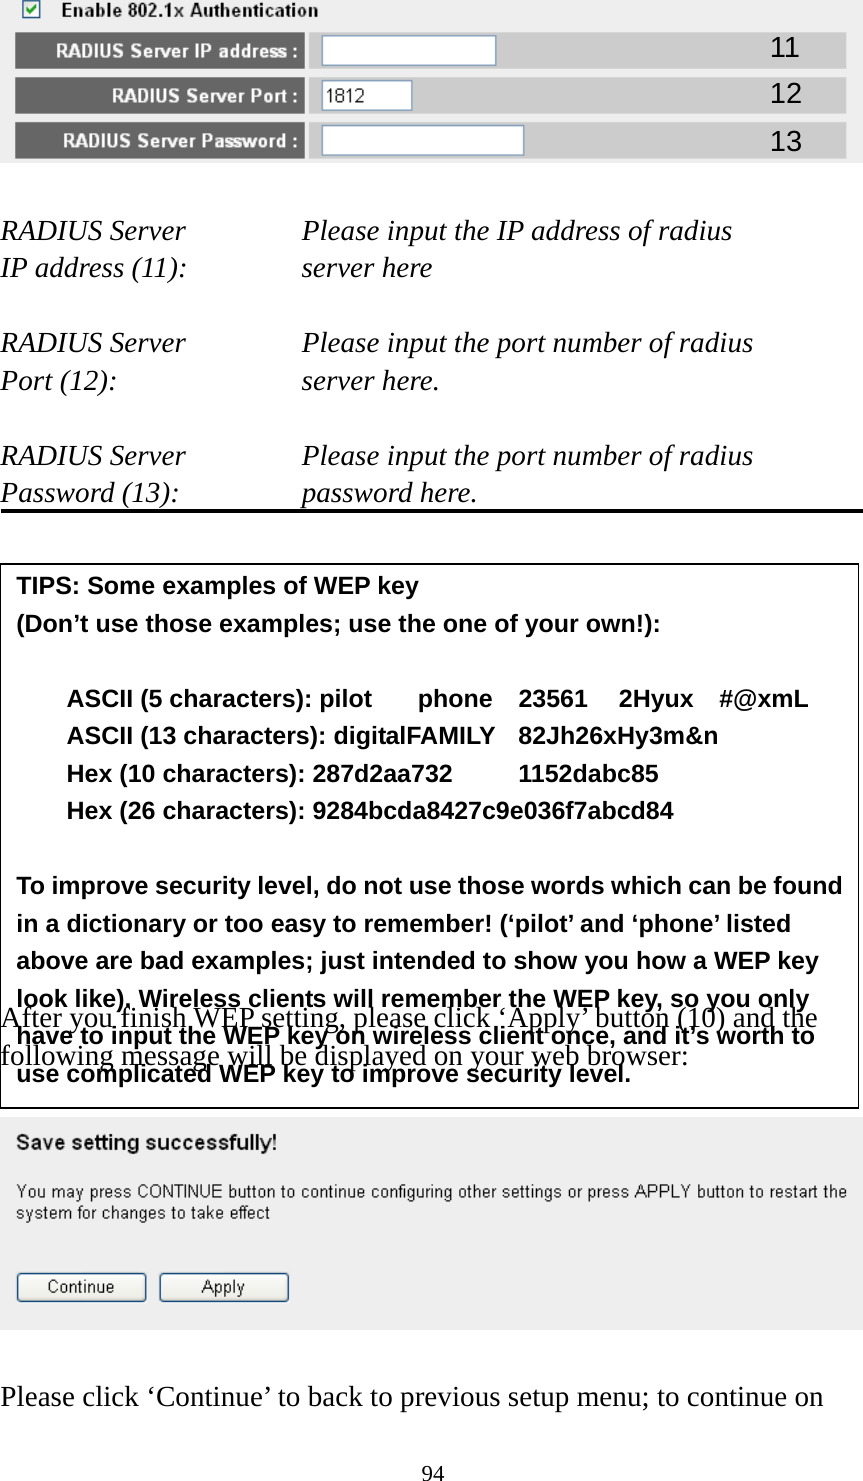 94   RADIUS Server      Please input the IP address of radius   IP address (11):      server here  RADIUS Server      Please input the port number of radius Port (12):    server here.  RADIUS Server      Please input the port number of radius Password (13):      password here.              After you finish WEP setting, please click ‘Apply’ button (10) and the following message will be displayed on your web browser:    Please click ‘Continue’ to back to previous setup menu; to continue on 11 12 13 TIPS: Some examples of WEP key   (Don’t use those examples; use the one of your own!):  ASCII (5 characters): pilot    phone    23561    2Hyux    #@xmL ASCII (13 characters): digitalFAMILY  82Jh26xHy3m&amp;n Hex (10 characters): 287d2aa732   1152dabc85 Hex (26 characters): 9284bcda8427c9e036f7abcd84  To improve security level, do not use those words which can be found in a dictionary or too easy to remember! (‘pilot’ and ‘phone’ listed above are bad examples; just intended to show you how a WEP key look like). Wireless clients will remember the WEP key, so you only have to input the WEP key on wireless client once, and it’s worth to use complicated WEP key to improve security level. 